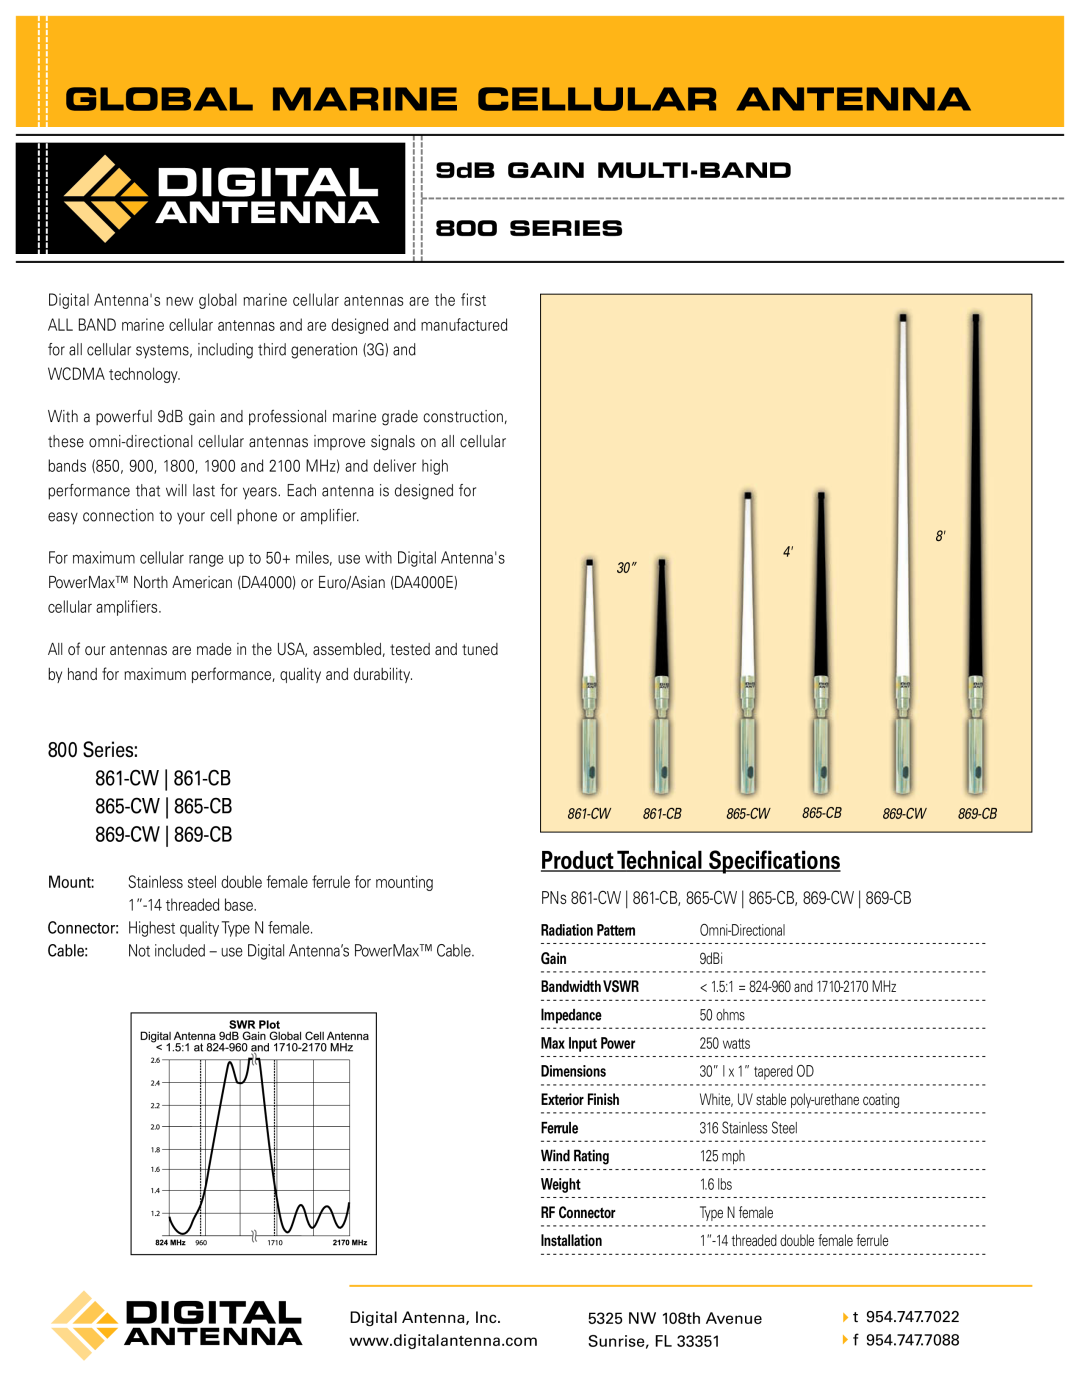 Digital Antenna 800 SERIES technical specifications Global Marine Cellular Antenna, Product Technical Specifications 